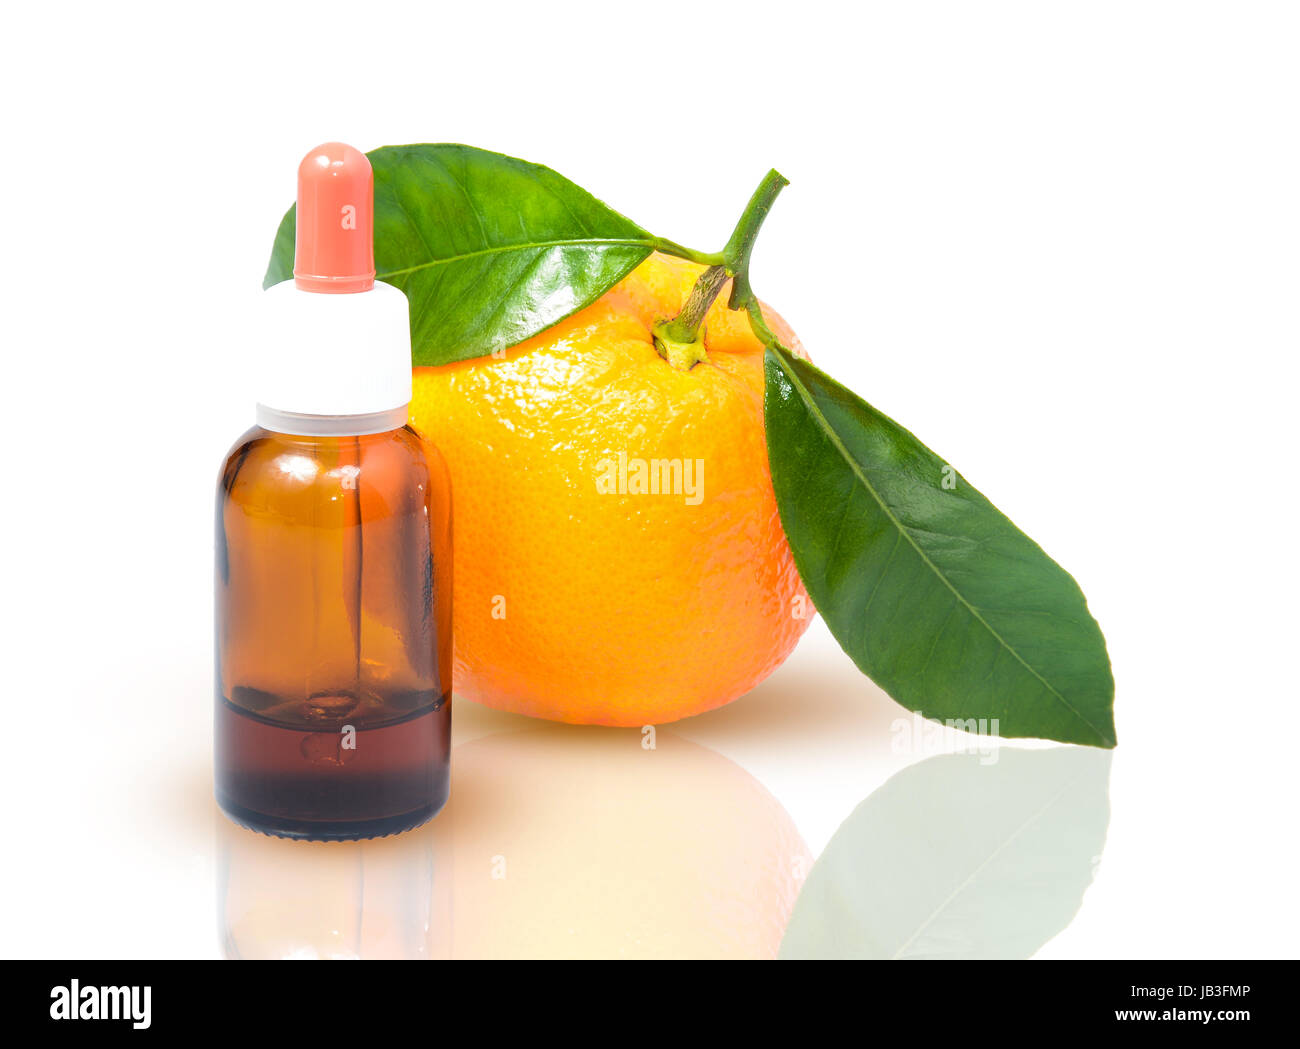 Orange with green leaves and a bottle with dropper isolated on a white background. Alternative medicine concept Stock Photo